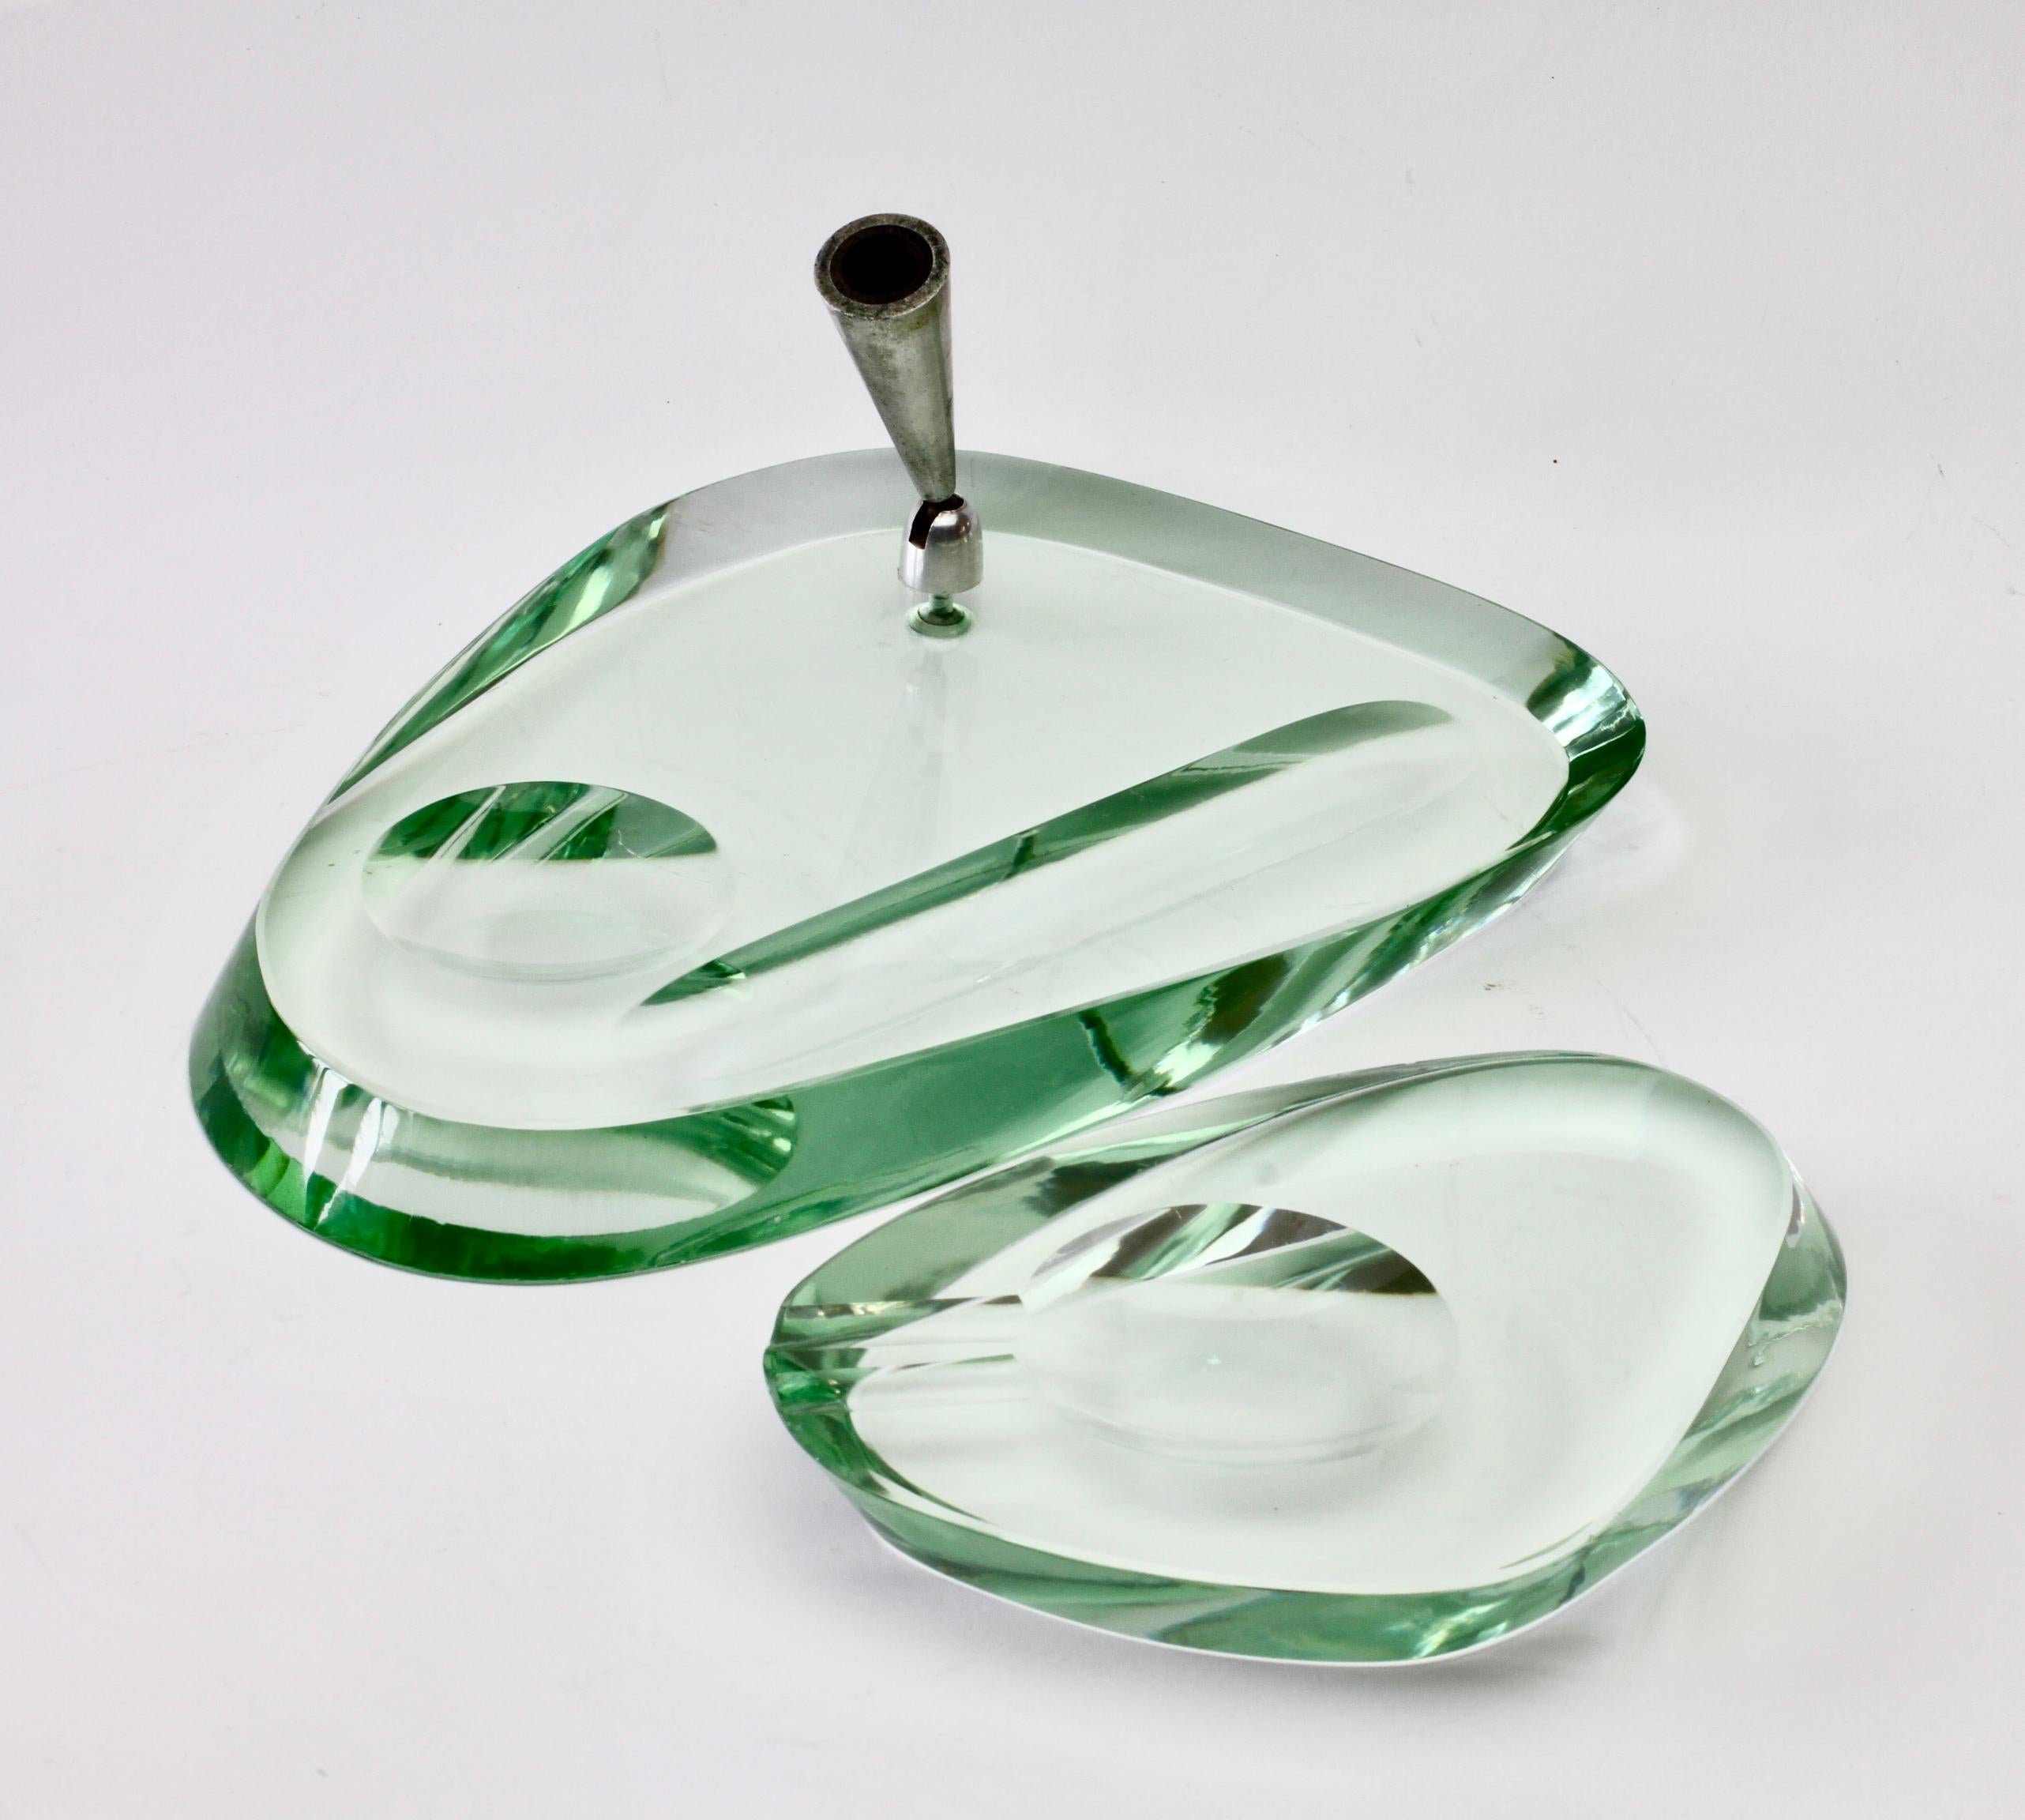 Max Ingrand for Fontana Arte (attributed) Midcentury Modern desk set featuring a pen holder or stand with a tray and an ashtray. Made in Italy of thick polished green crystal glass, circa. 1940s-1950s

A wonderful statement for any desk or console